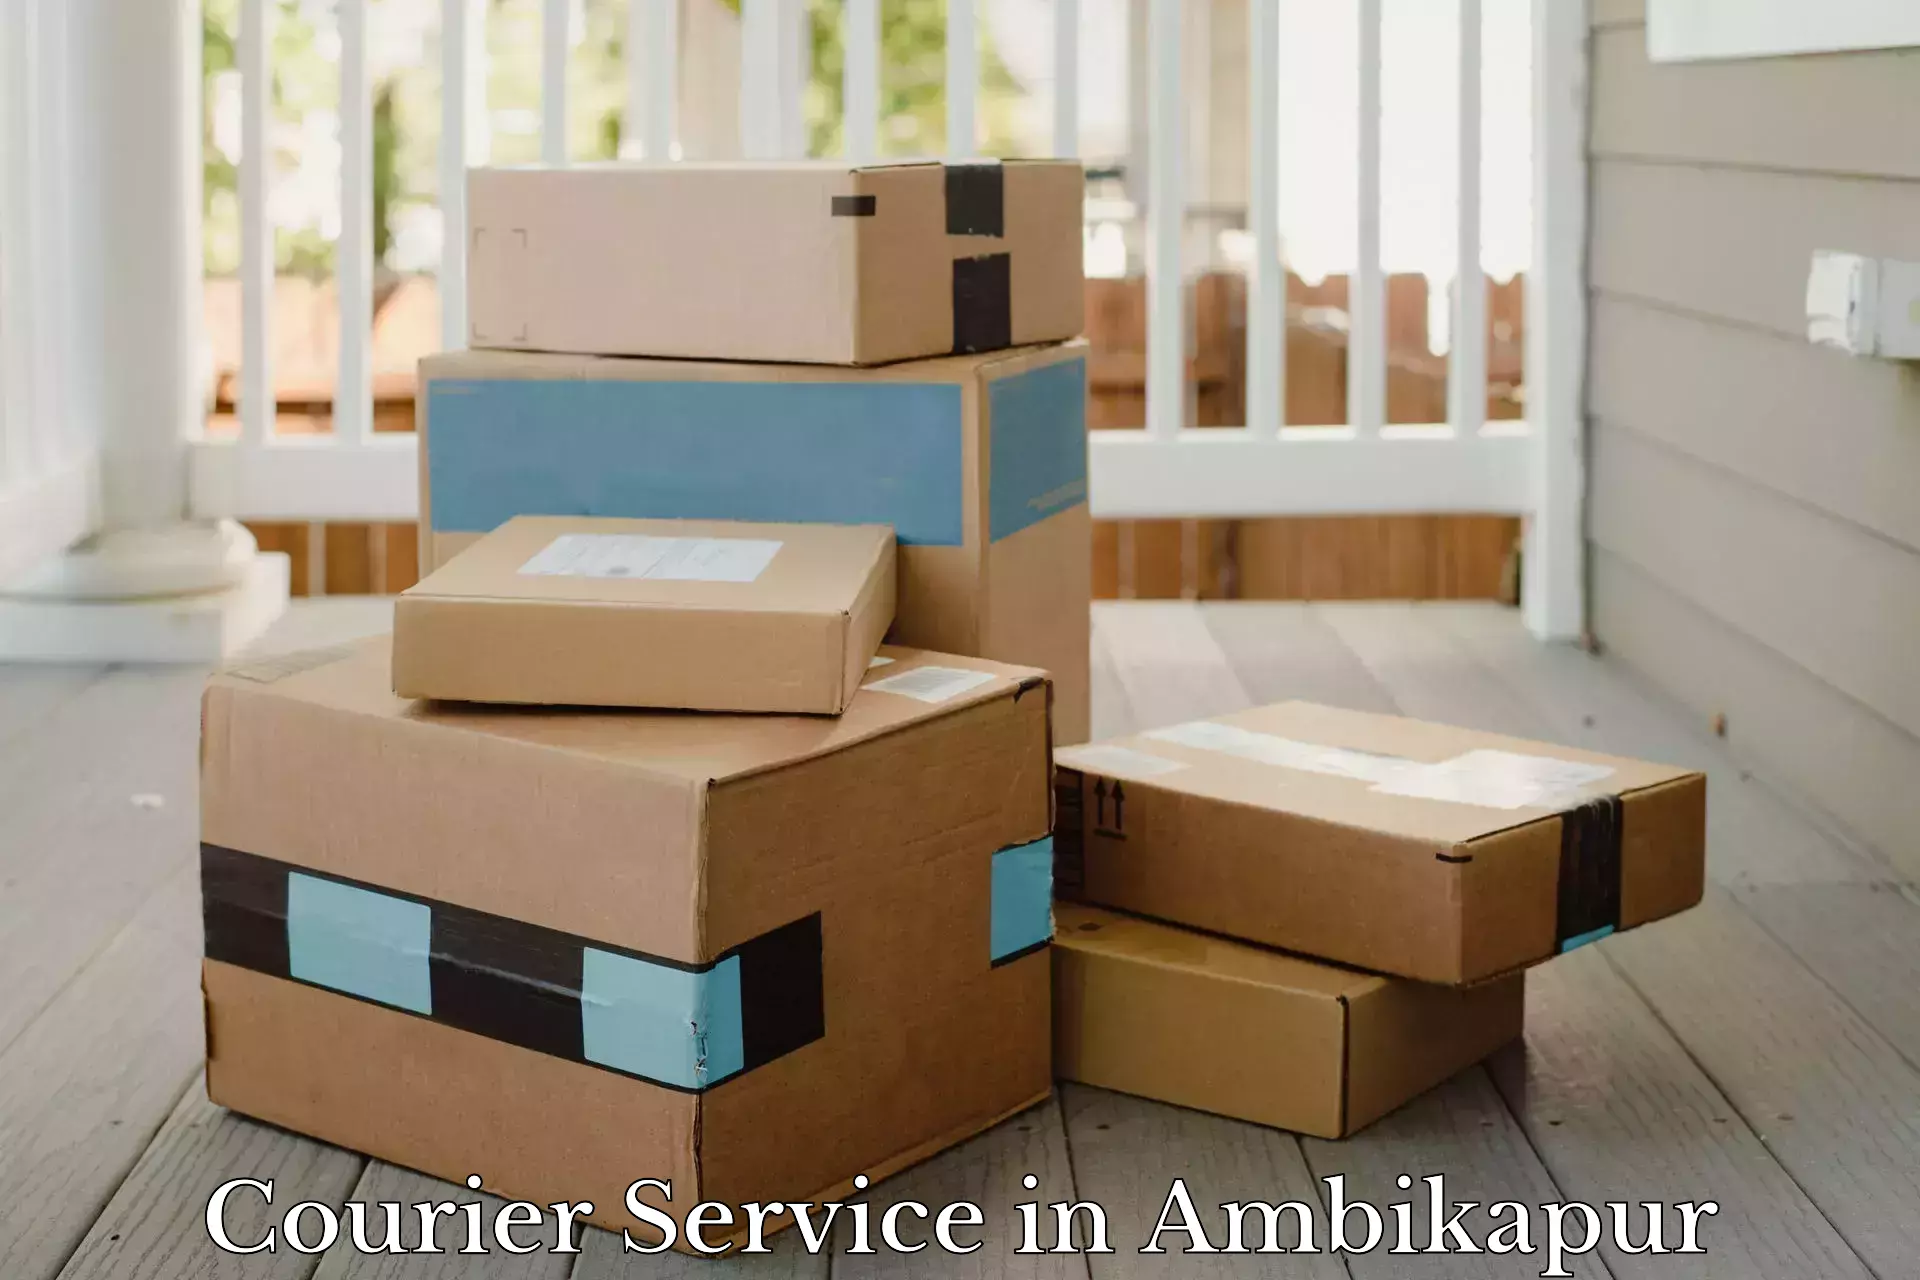 Reliable freight solutions in Ambikapur